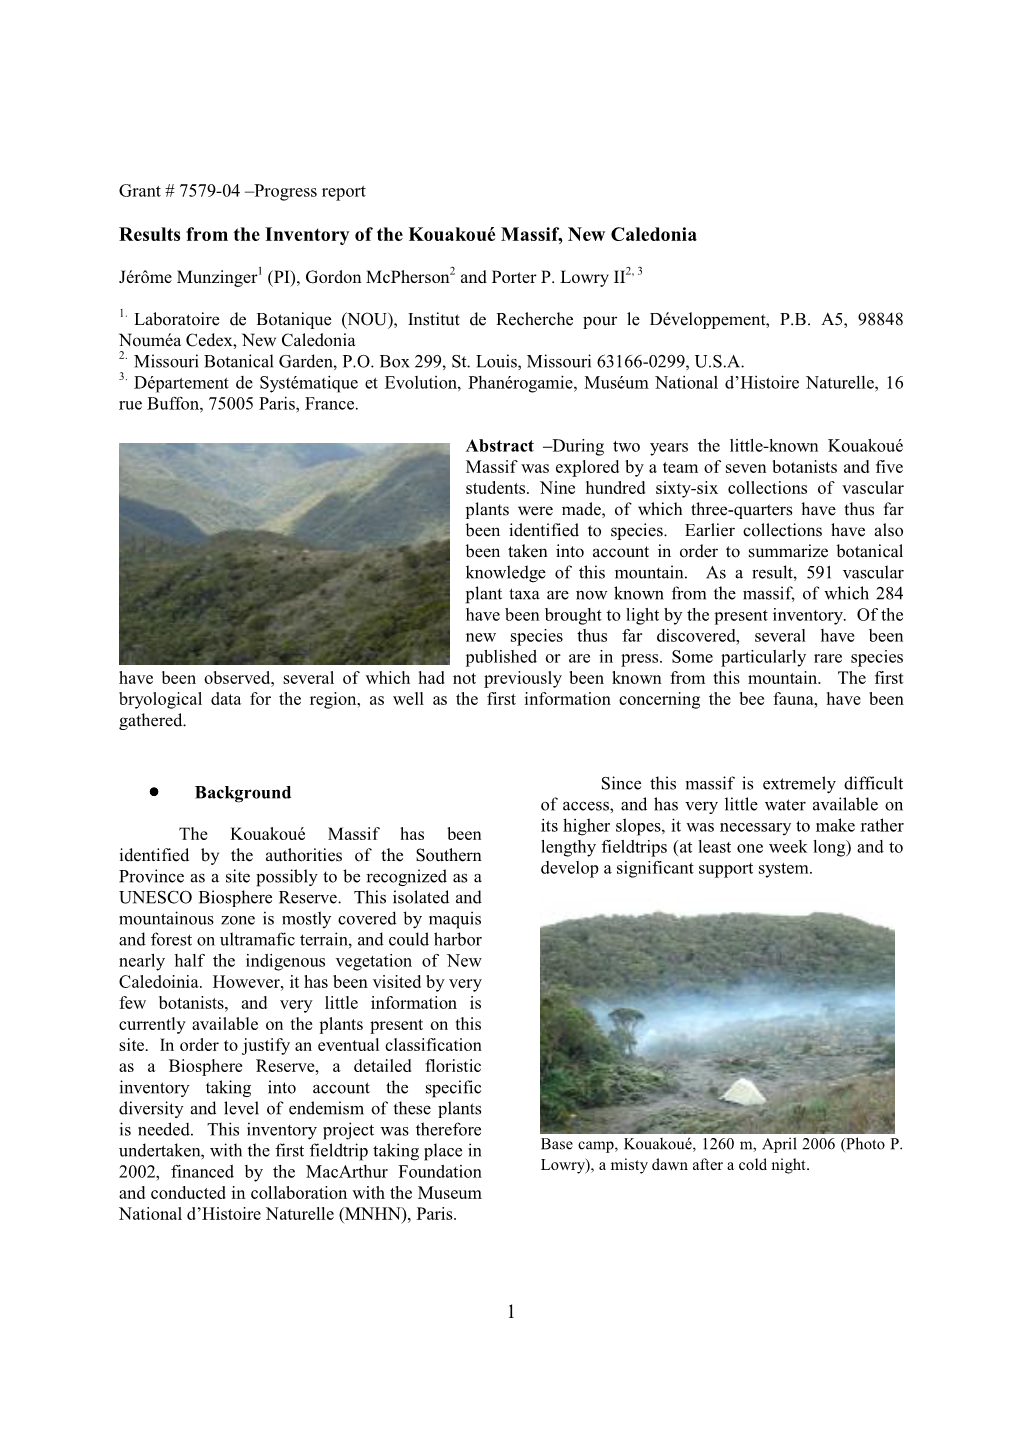 1 Results from the Inventory of the Kouakoué Massif, New Caledonia